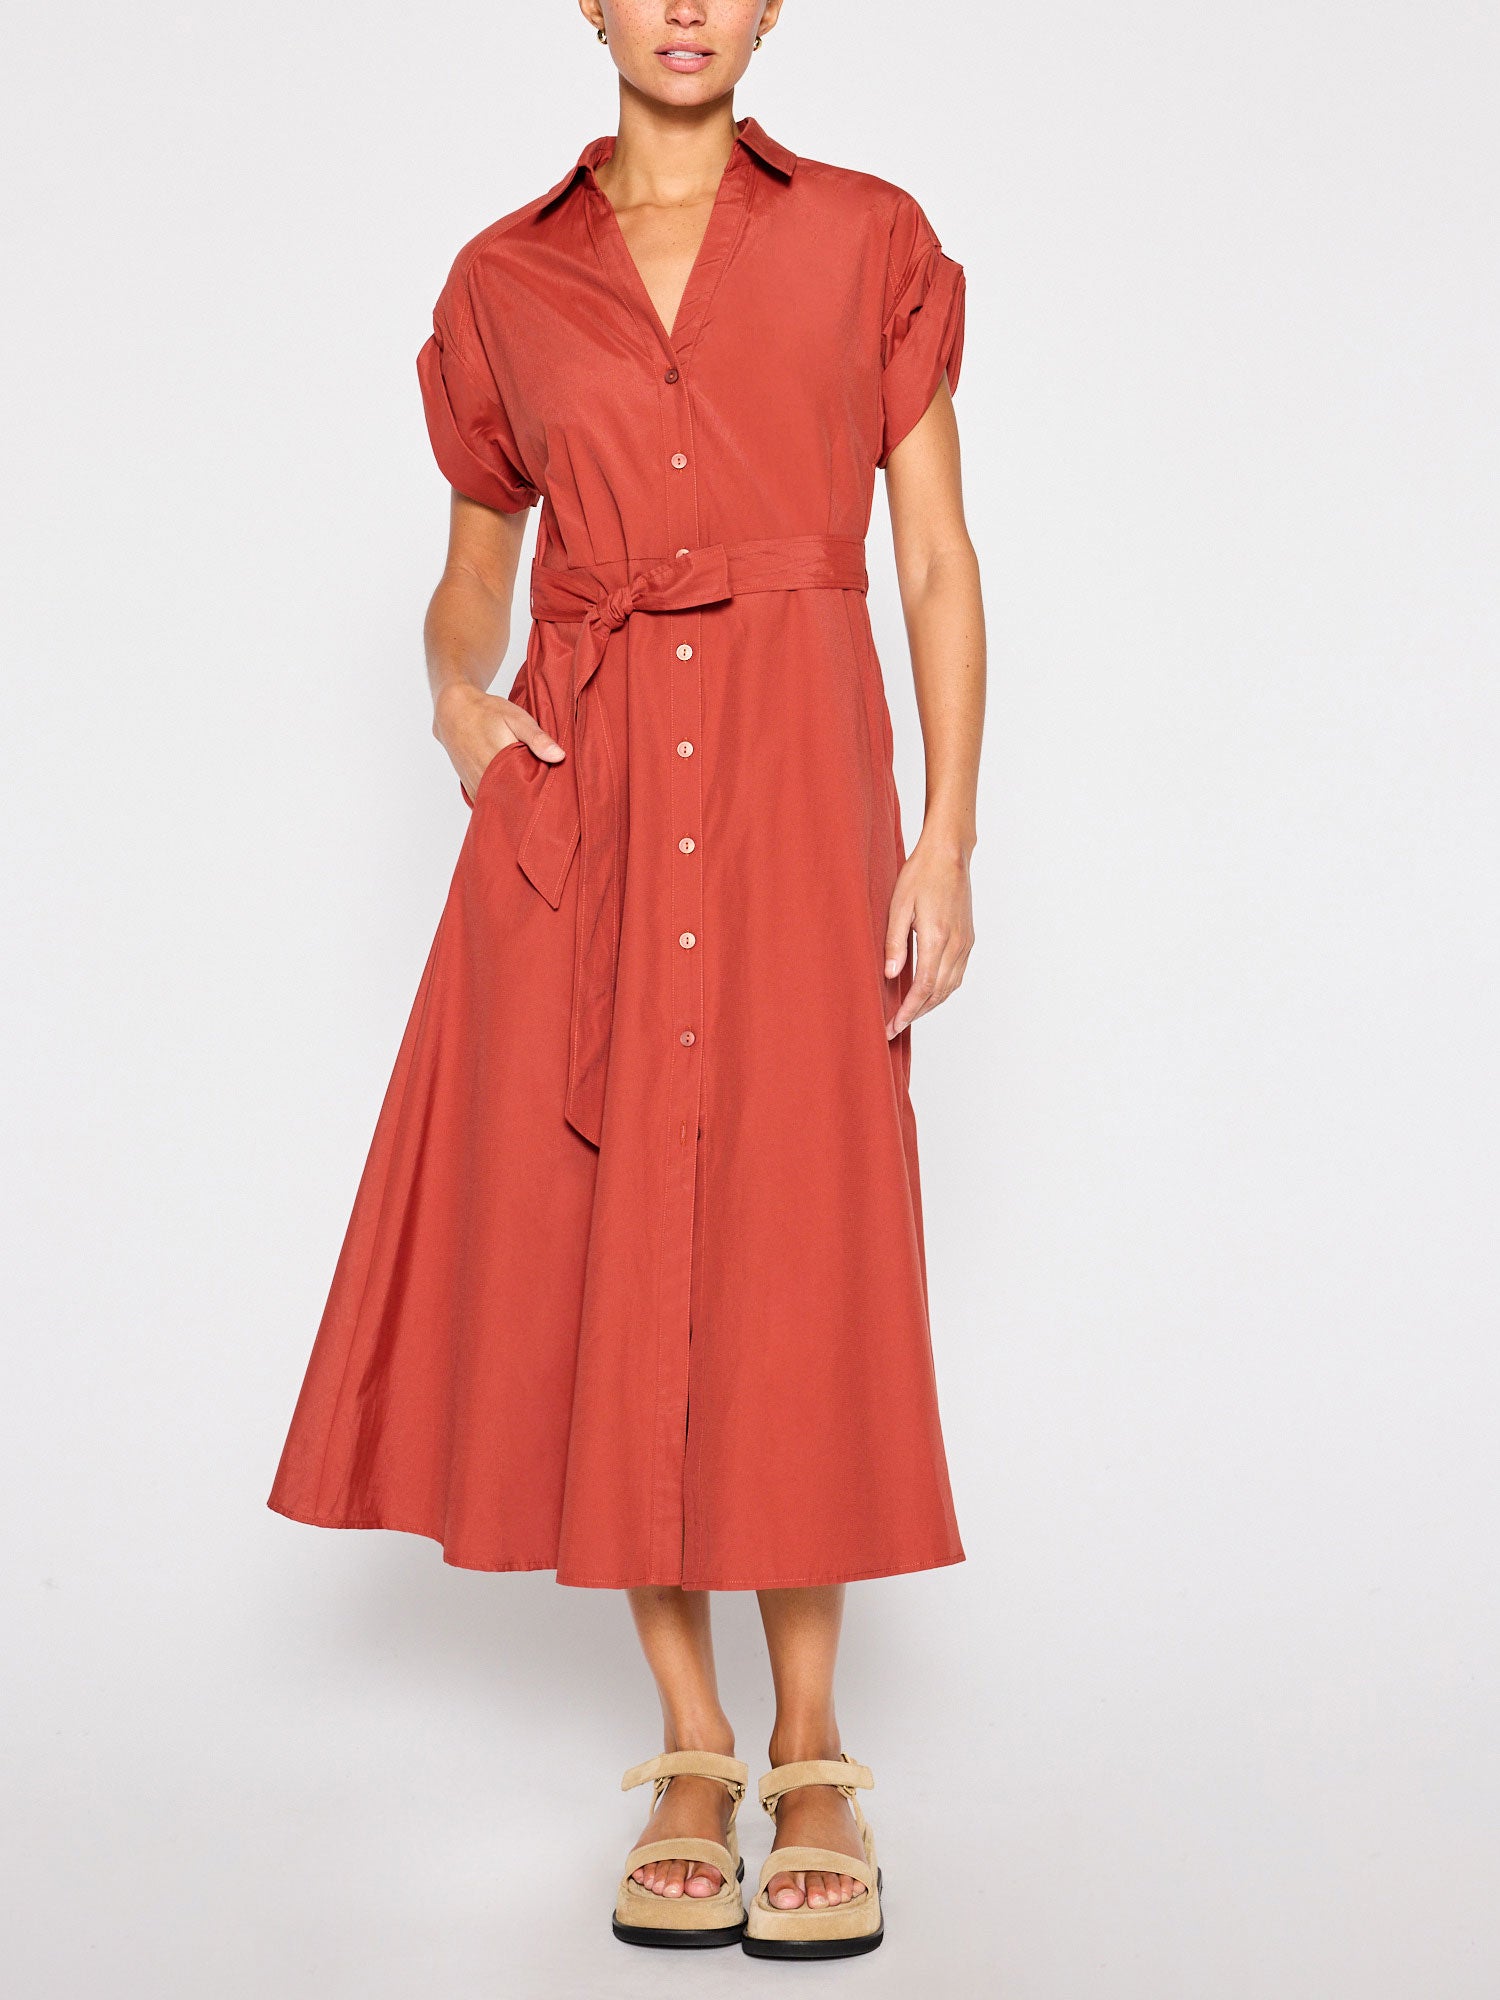 Fia red maxi shirtdress front view 2